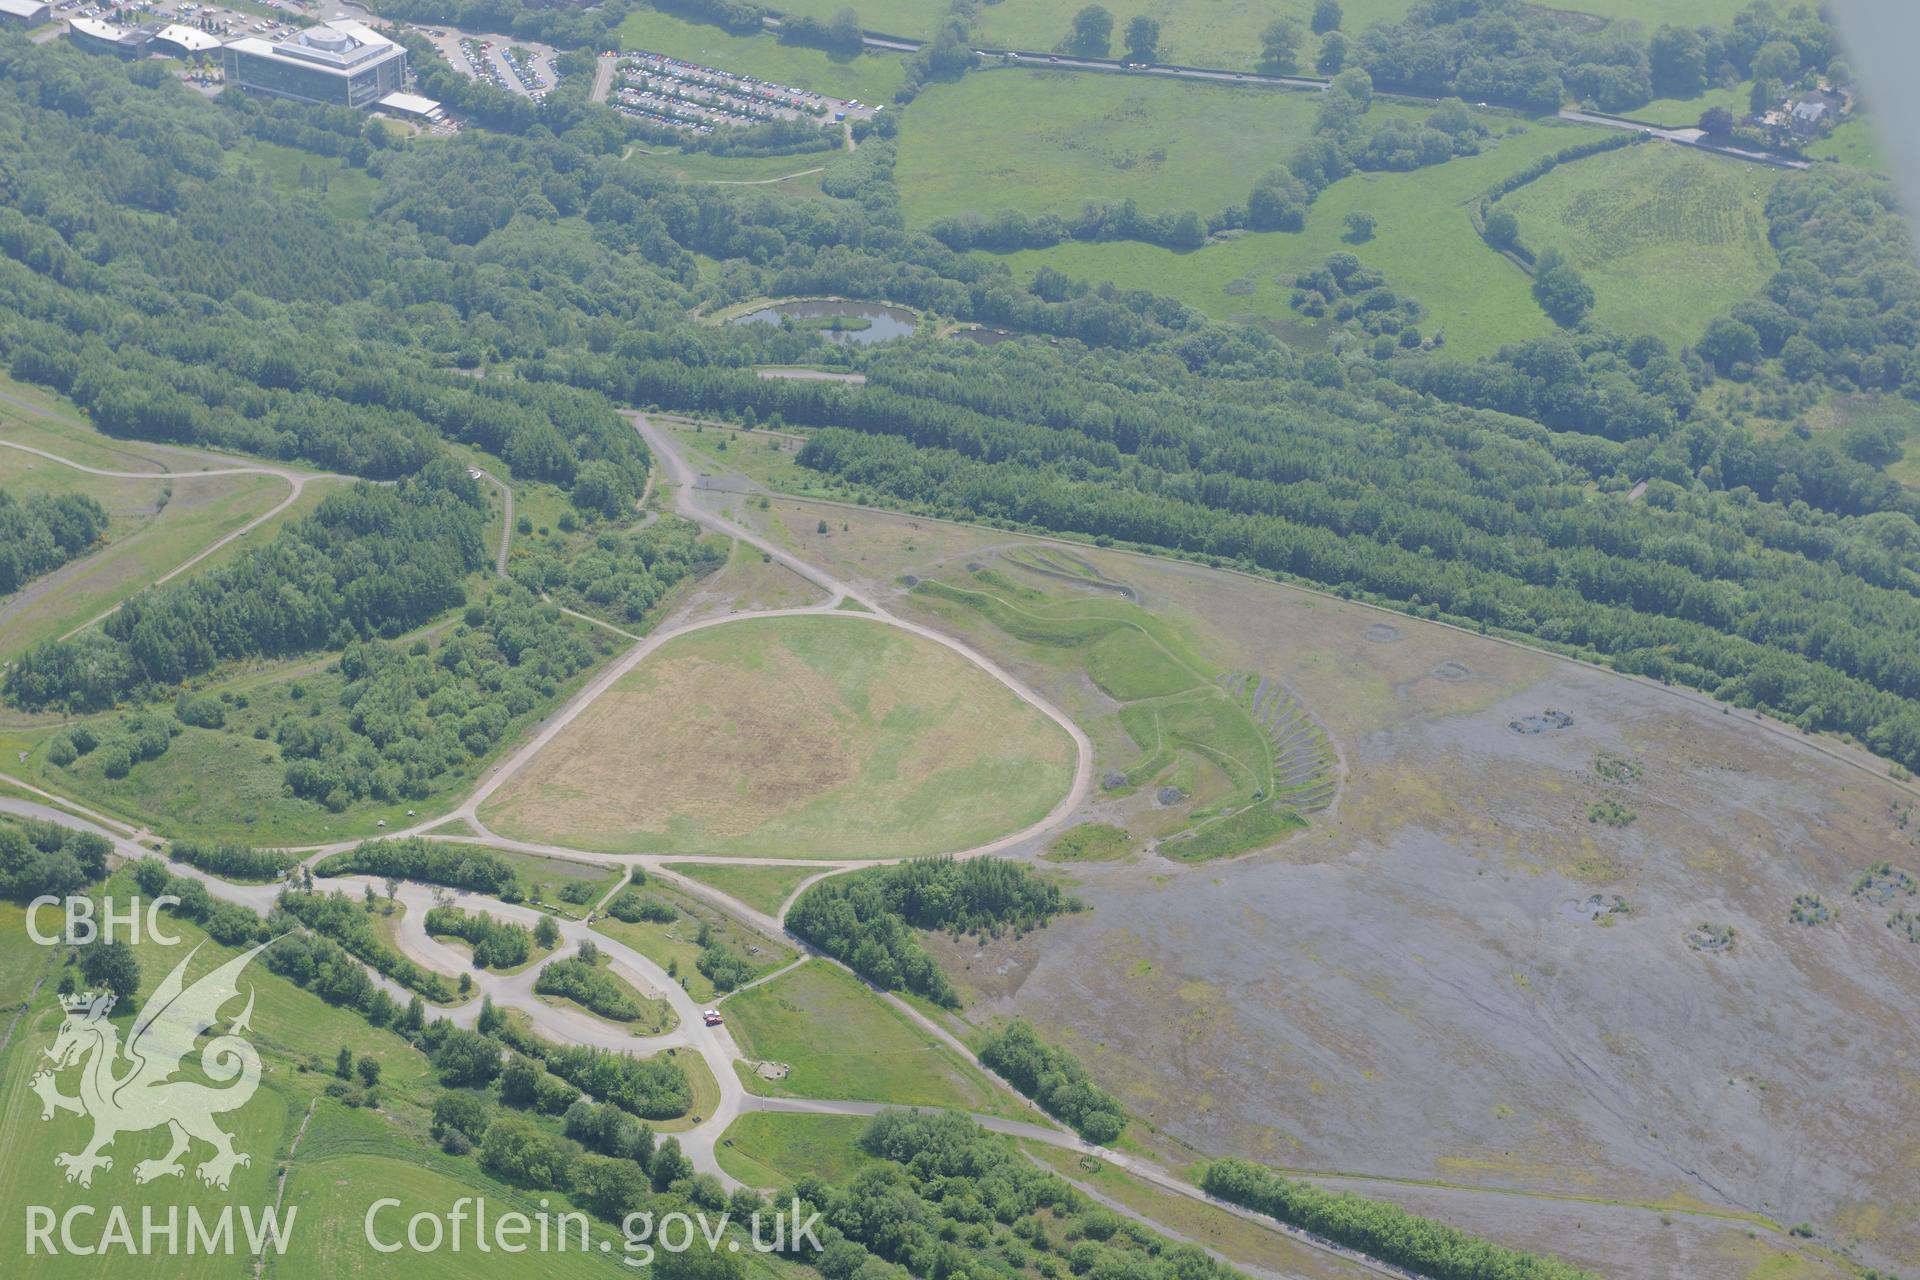 Pit pony sculpture ('Sultan the Pit Pony') at Penallta Community Park, near Ystrad Mynach. Oblique aerial photograph taken during the Royal Commission's programme of archaeological aerial reconnaissance by Toby Driver on 11th June 2015.